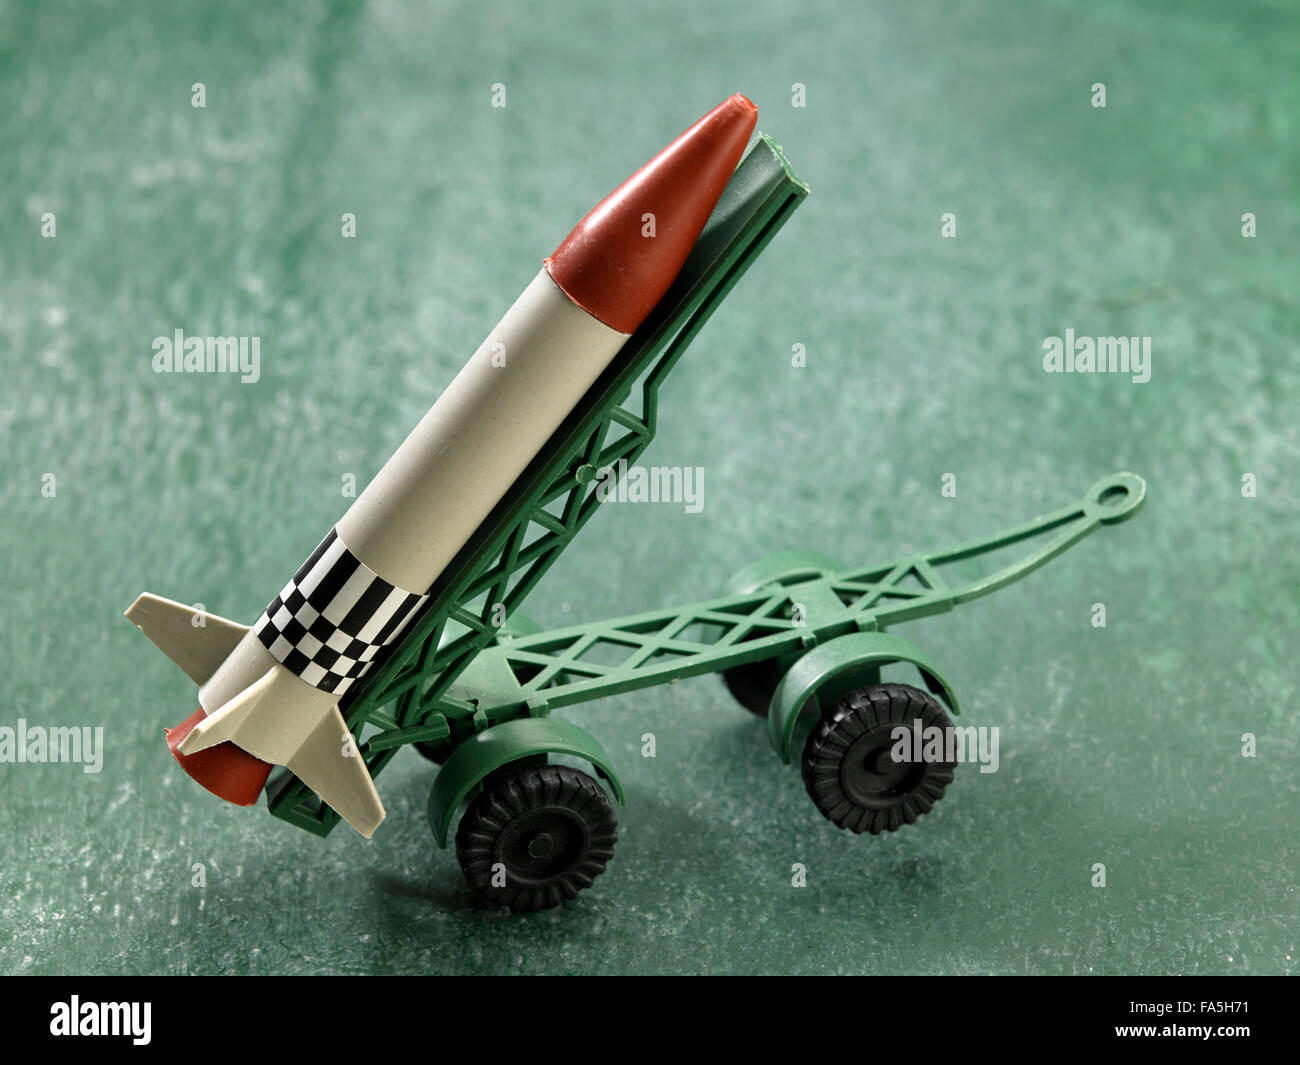 plastic toy missile with carrier Stock Photo - Alamy